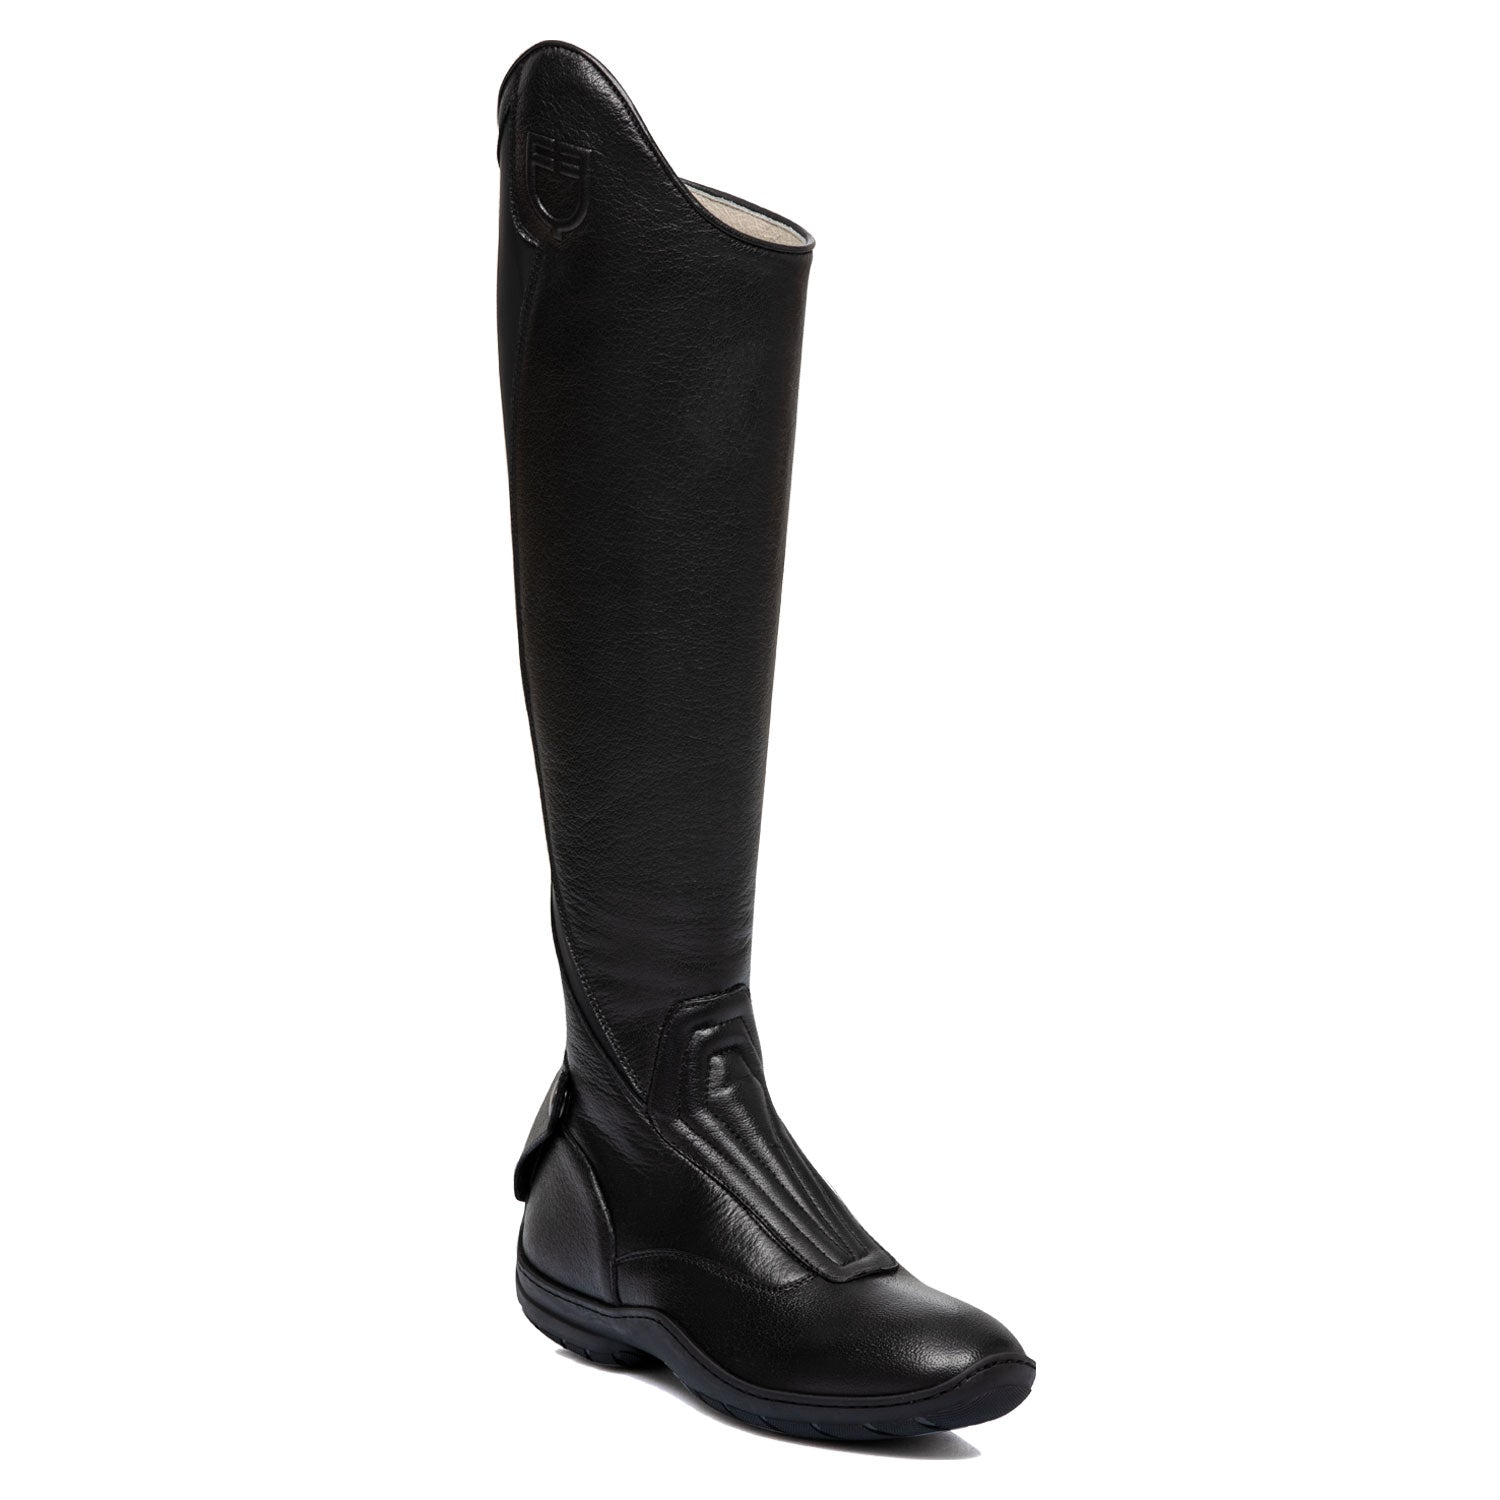 Equestro Sporty Sole Riding Boots